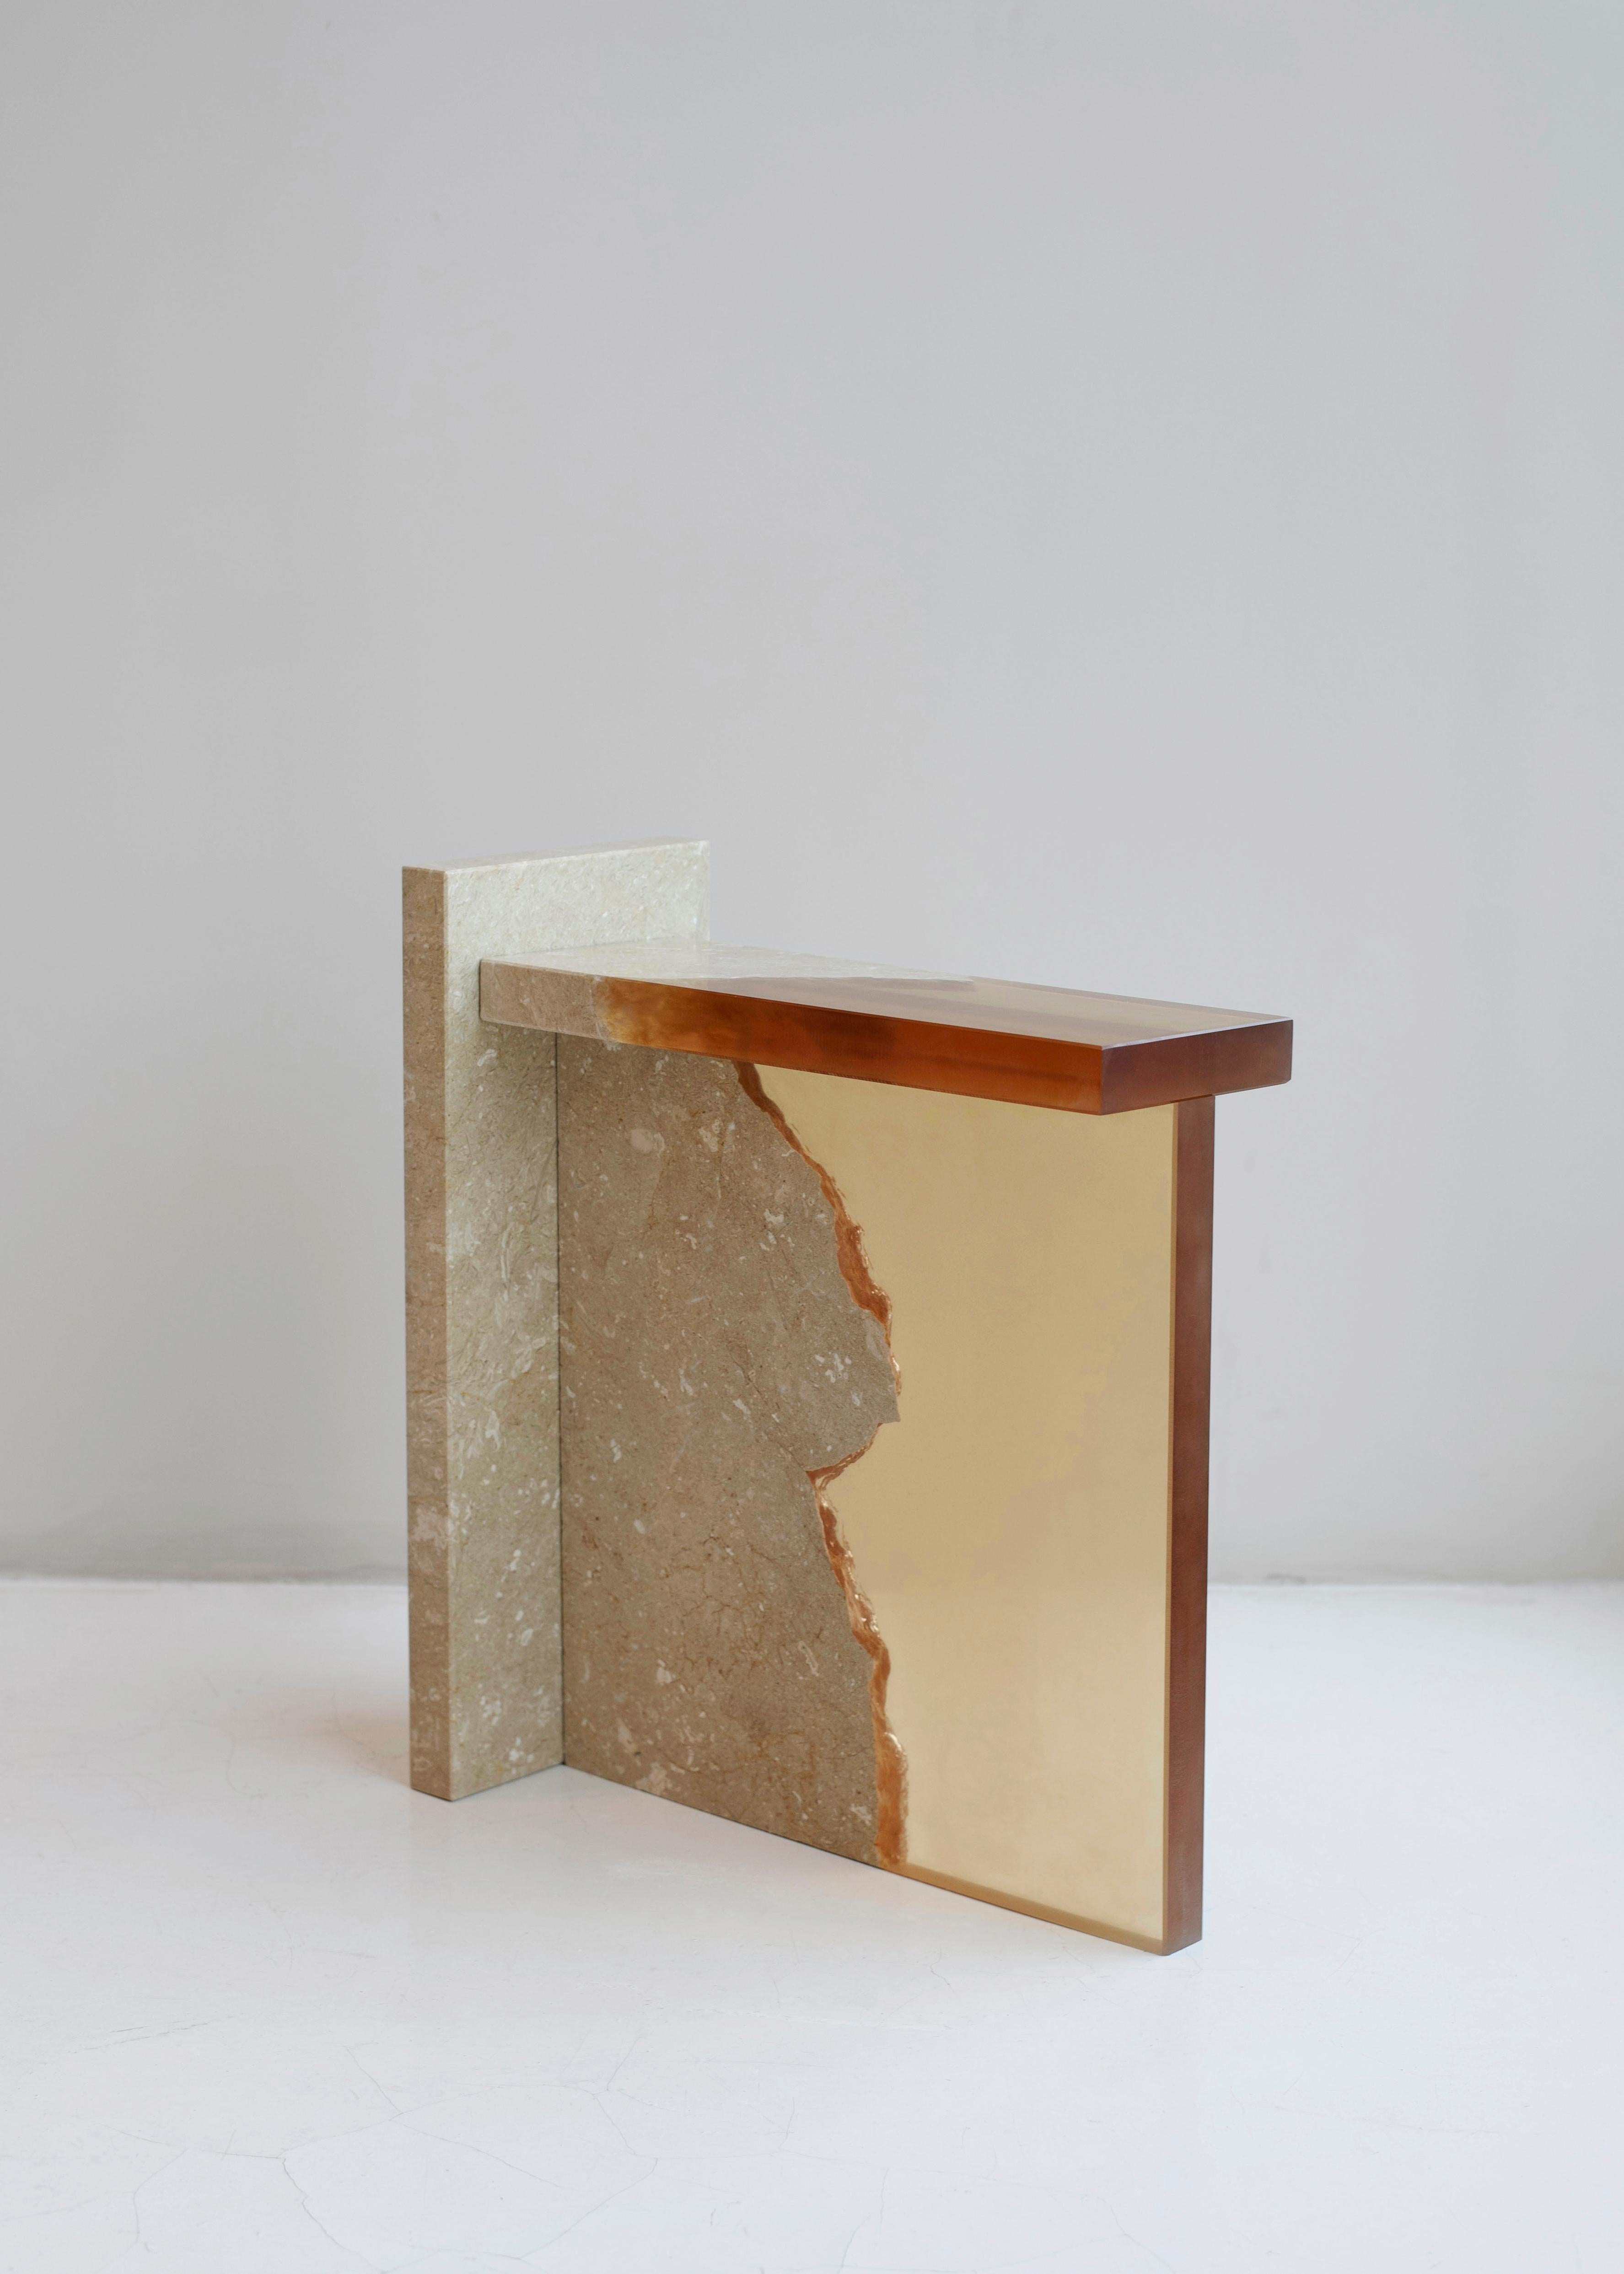 Organic Modern Crystal Resin and Marble Fragment Side Table by Jang Hea Kyoung